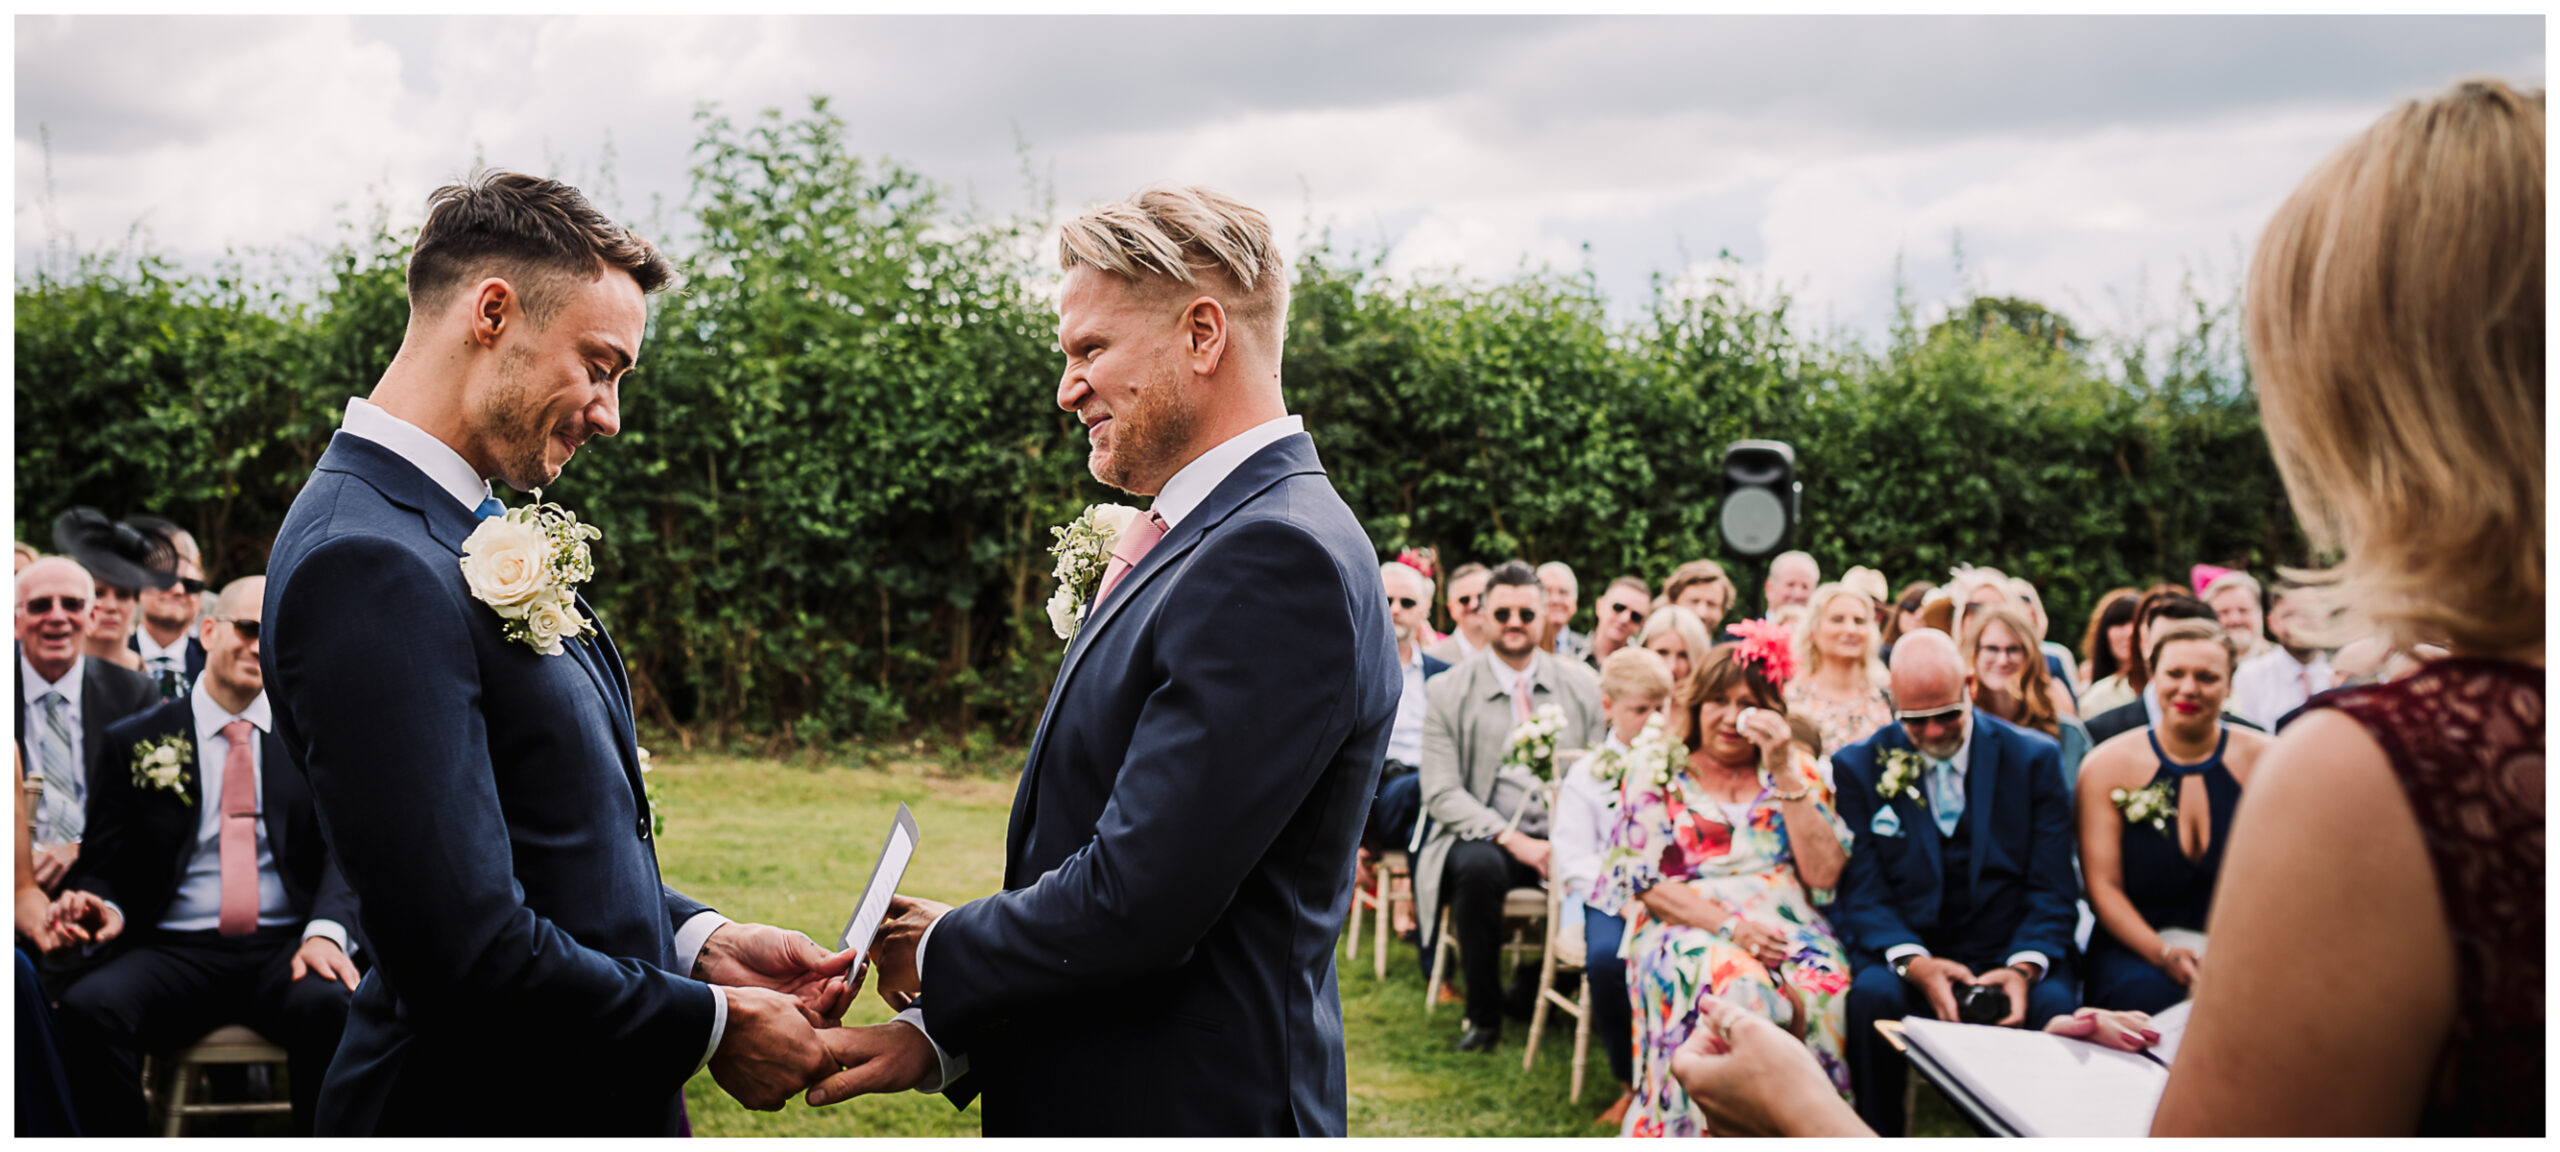 outdoor wedding ceremony photographed in the sunshine in Hertfordshire